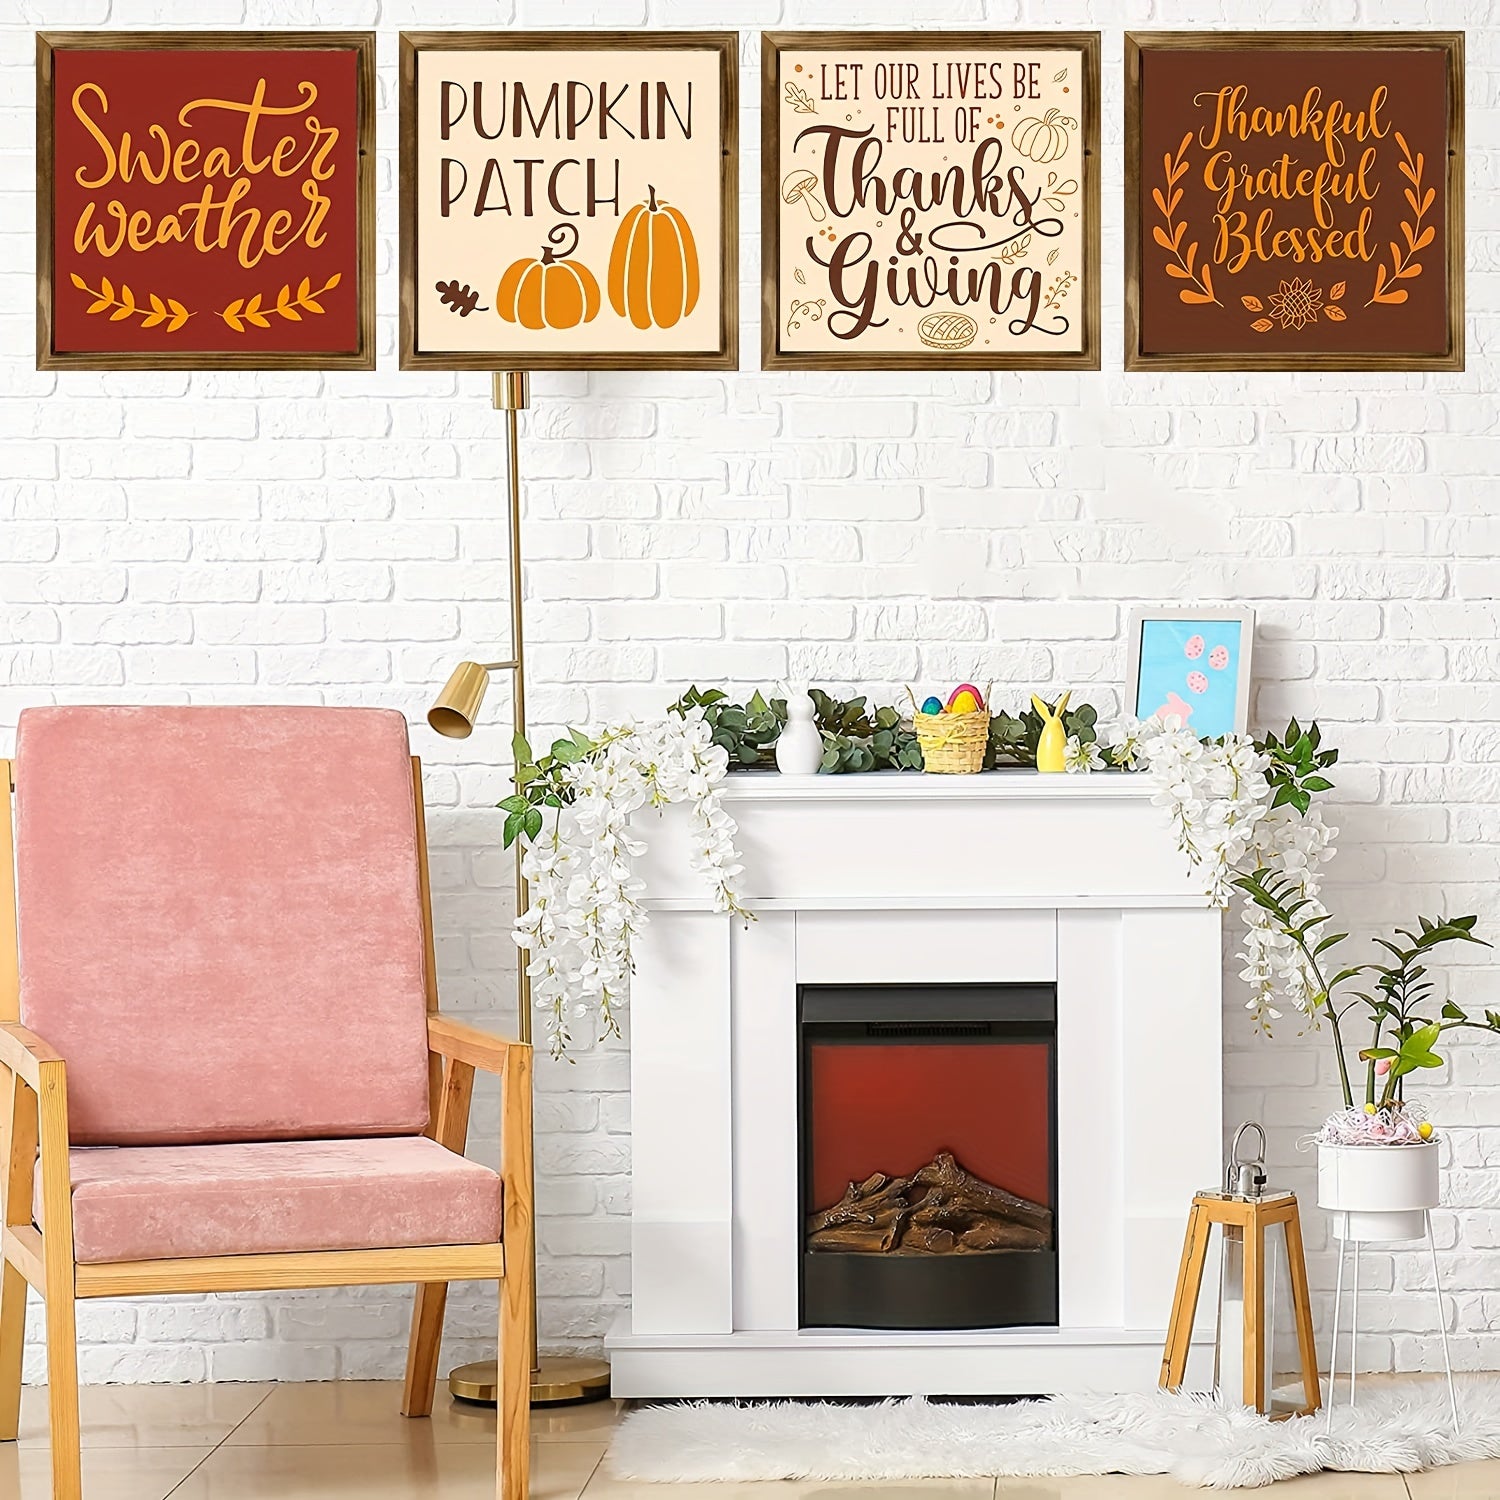 Let Our Lives Be Full Of Thanks & Giving (thanksgiving themed) Christian Wooden Sign (11.81x11.81inch 30CMx30CM) claimedbygoddesigns